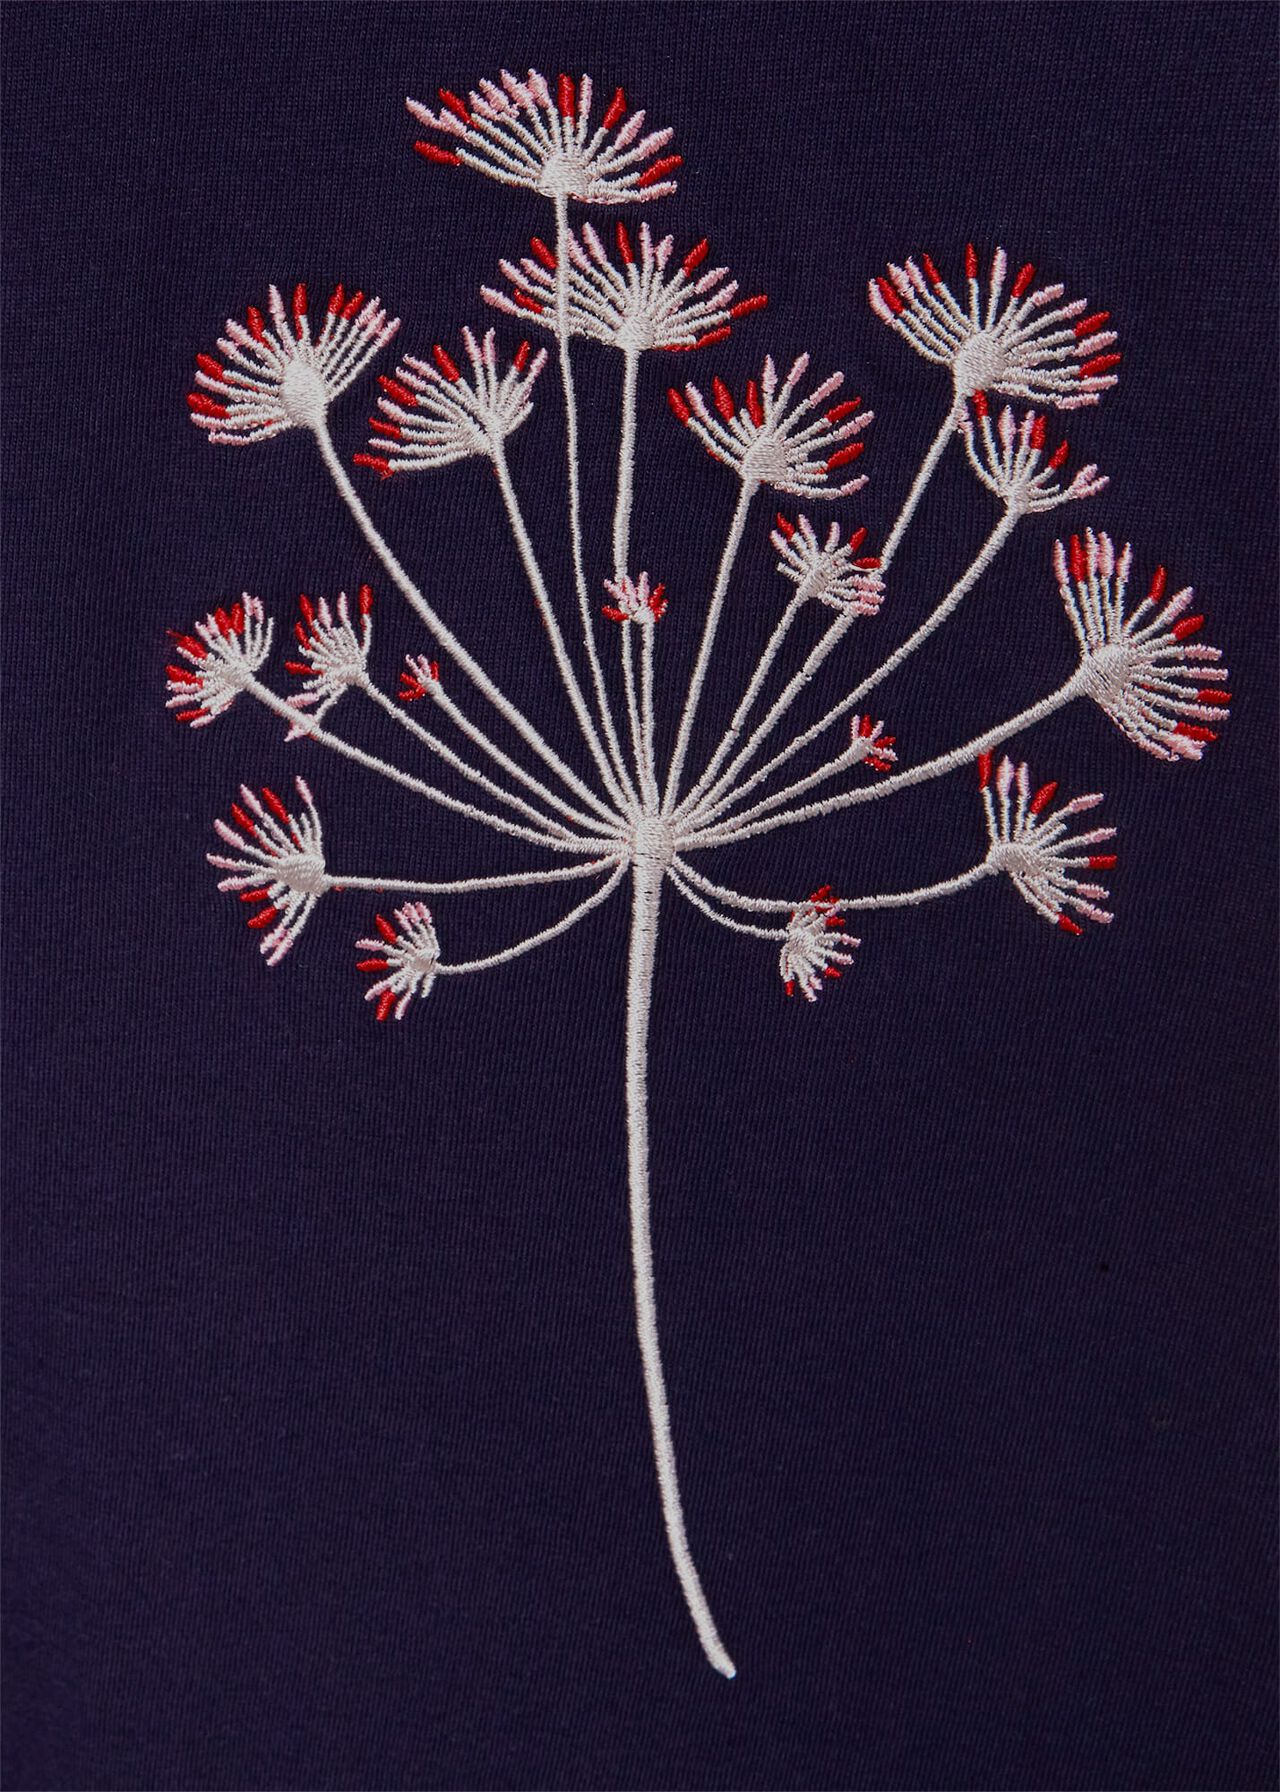 Jamie Embroided T-Shirt, Cow Parsley, hi-res